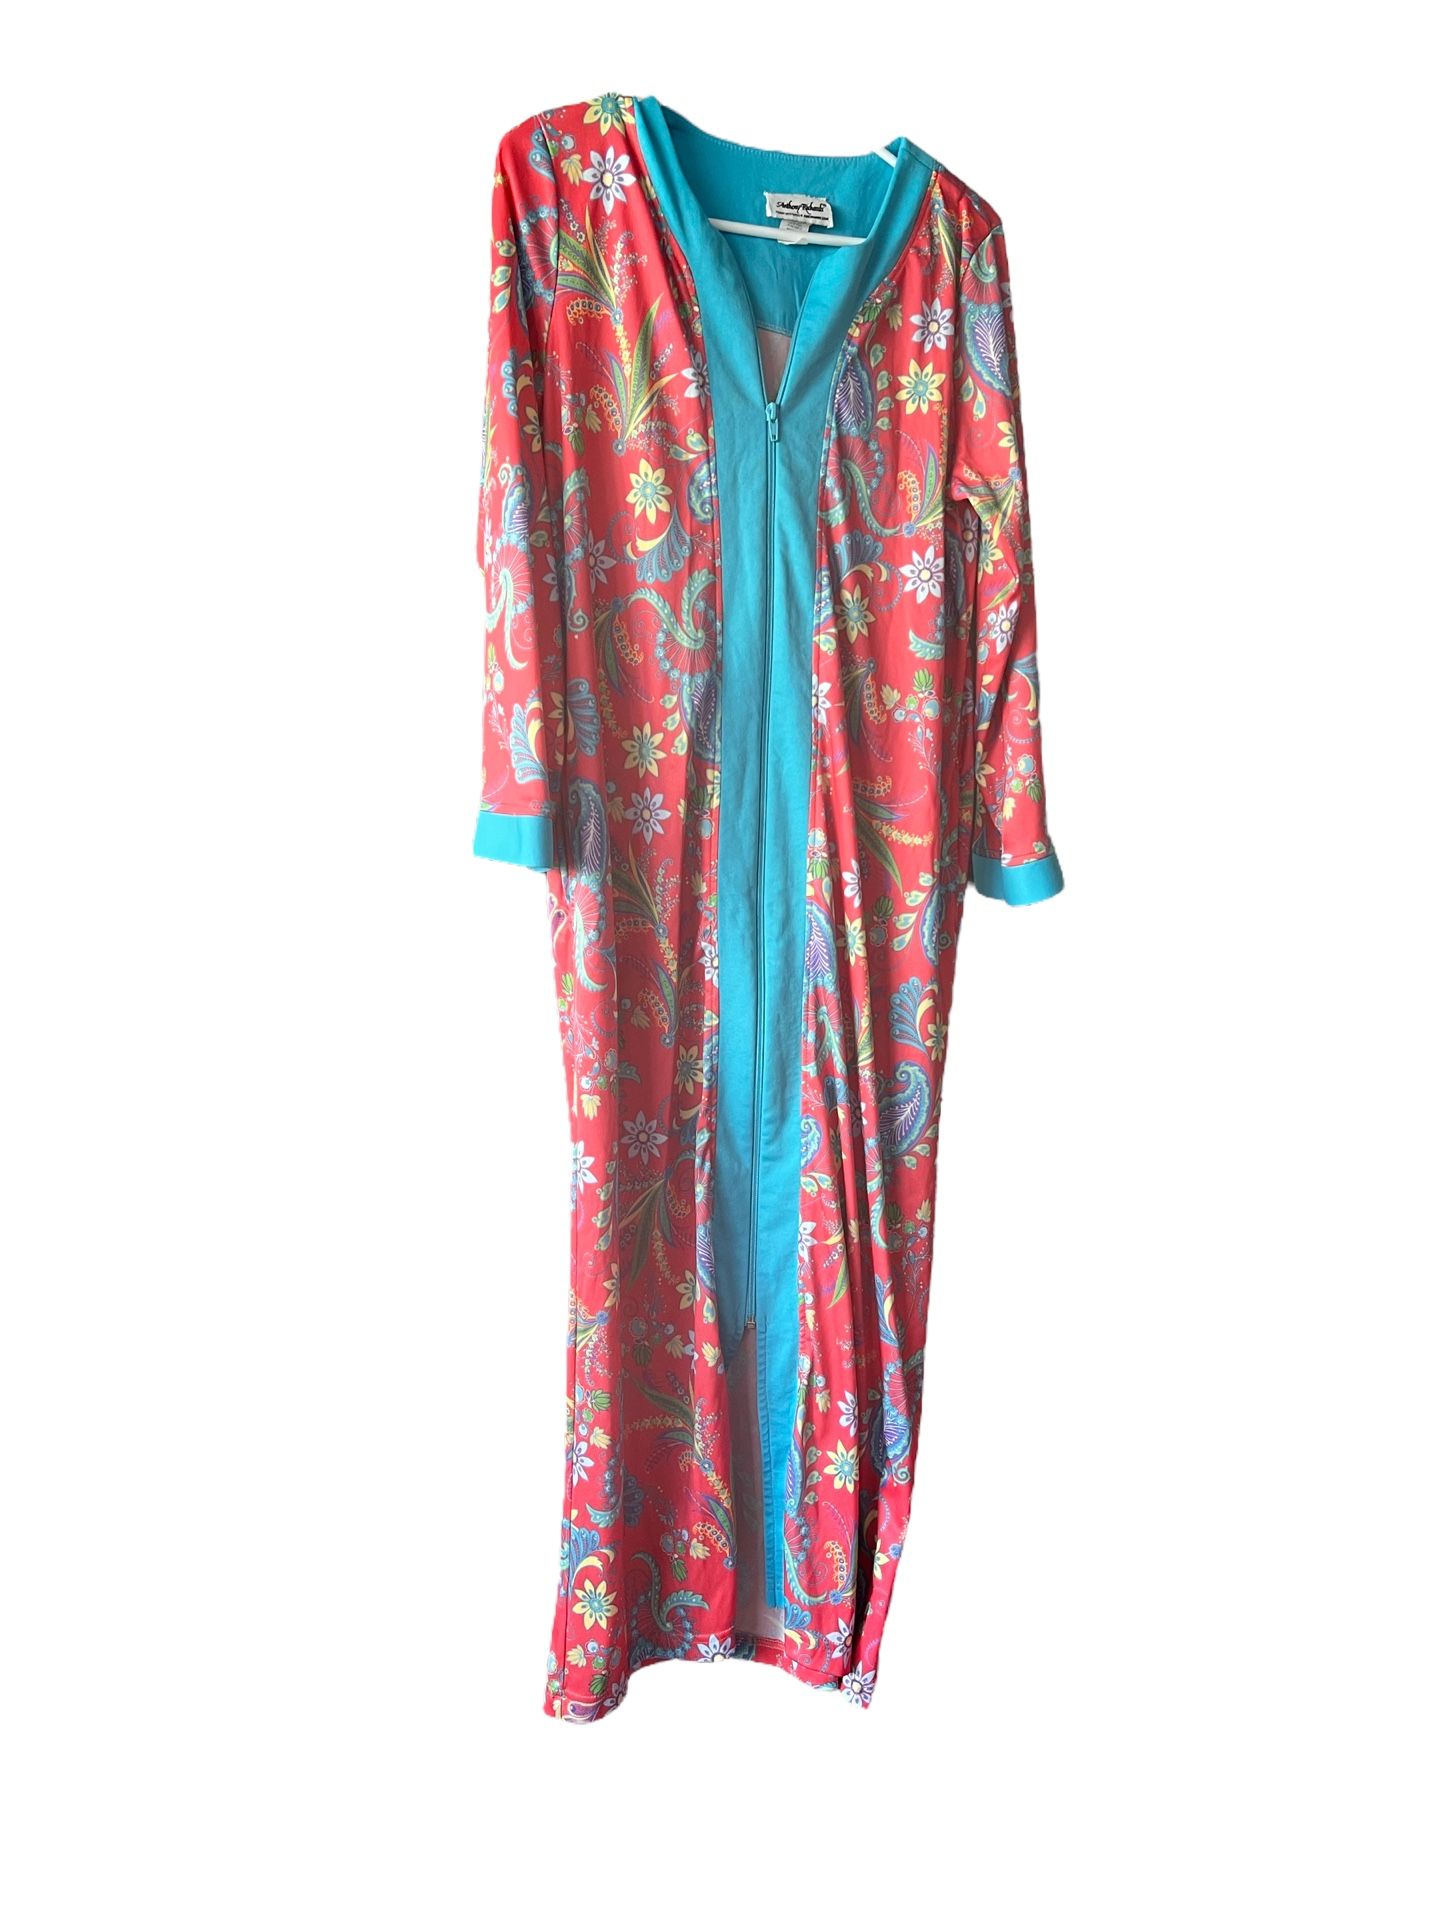 Anthony Richards Medium Zip Polyester Robe Housecoat Mumu Paisley Granny Colorfu.  Long sleeved very beautiful color pattern. Comes from a pet and smo